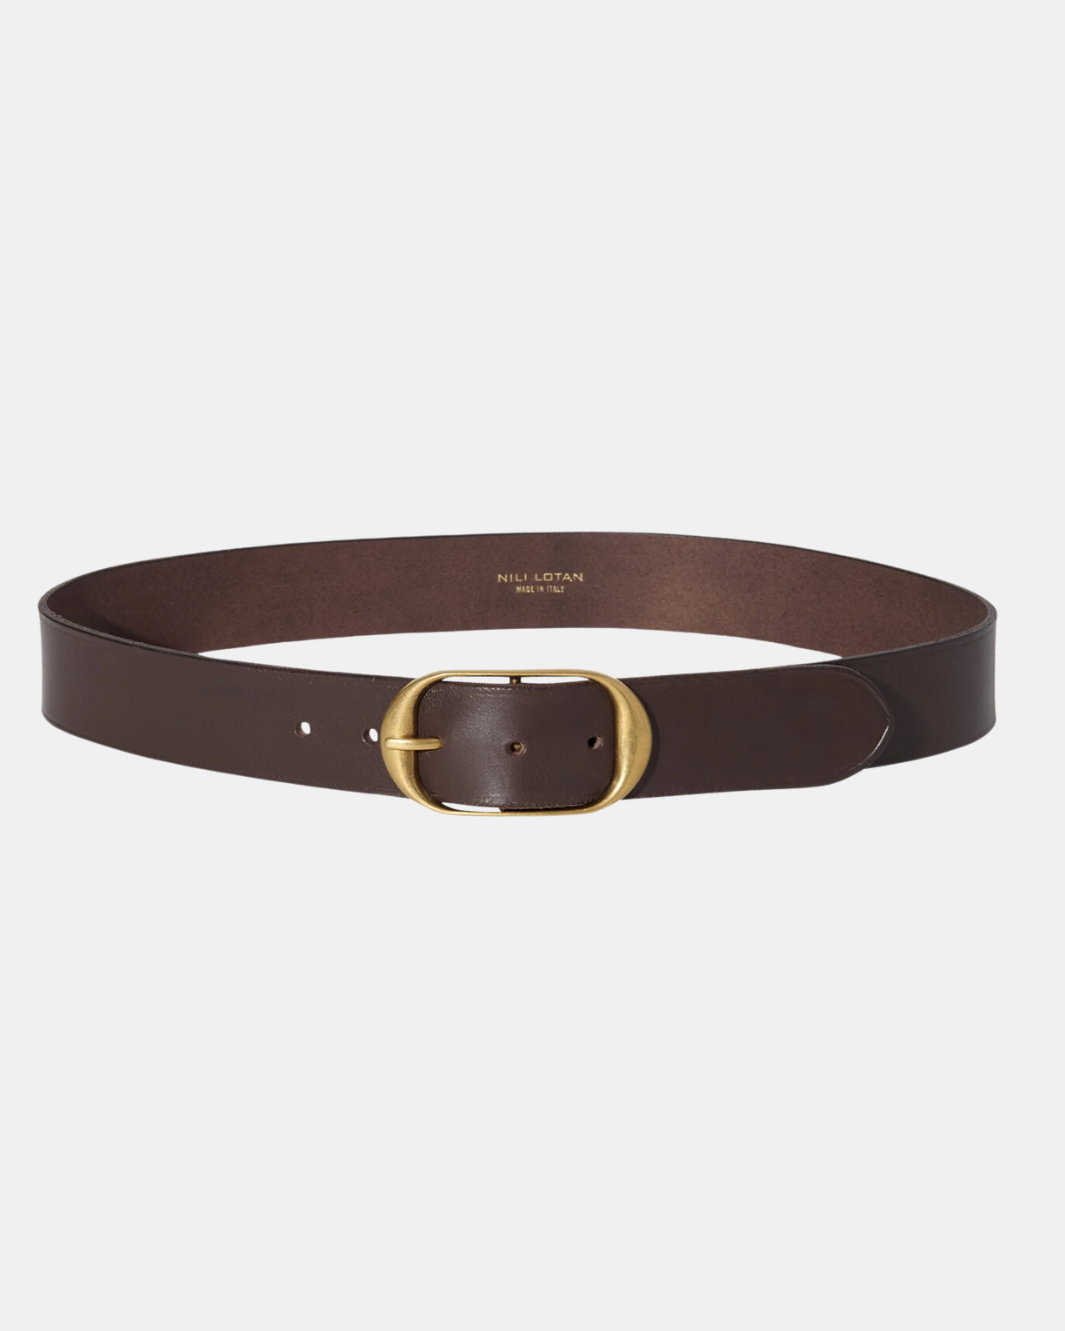 NILI BELT IN BROWN WITH BRASS - Romi Boutique